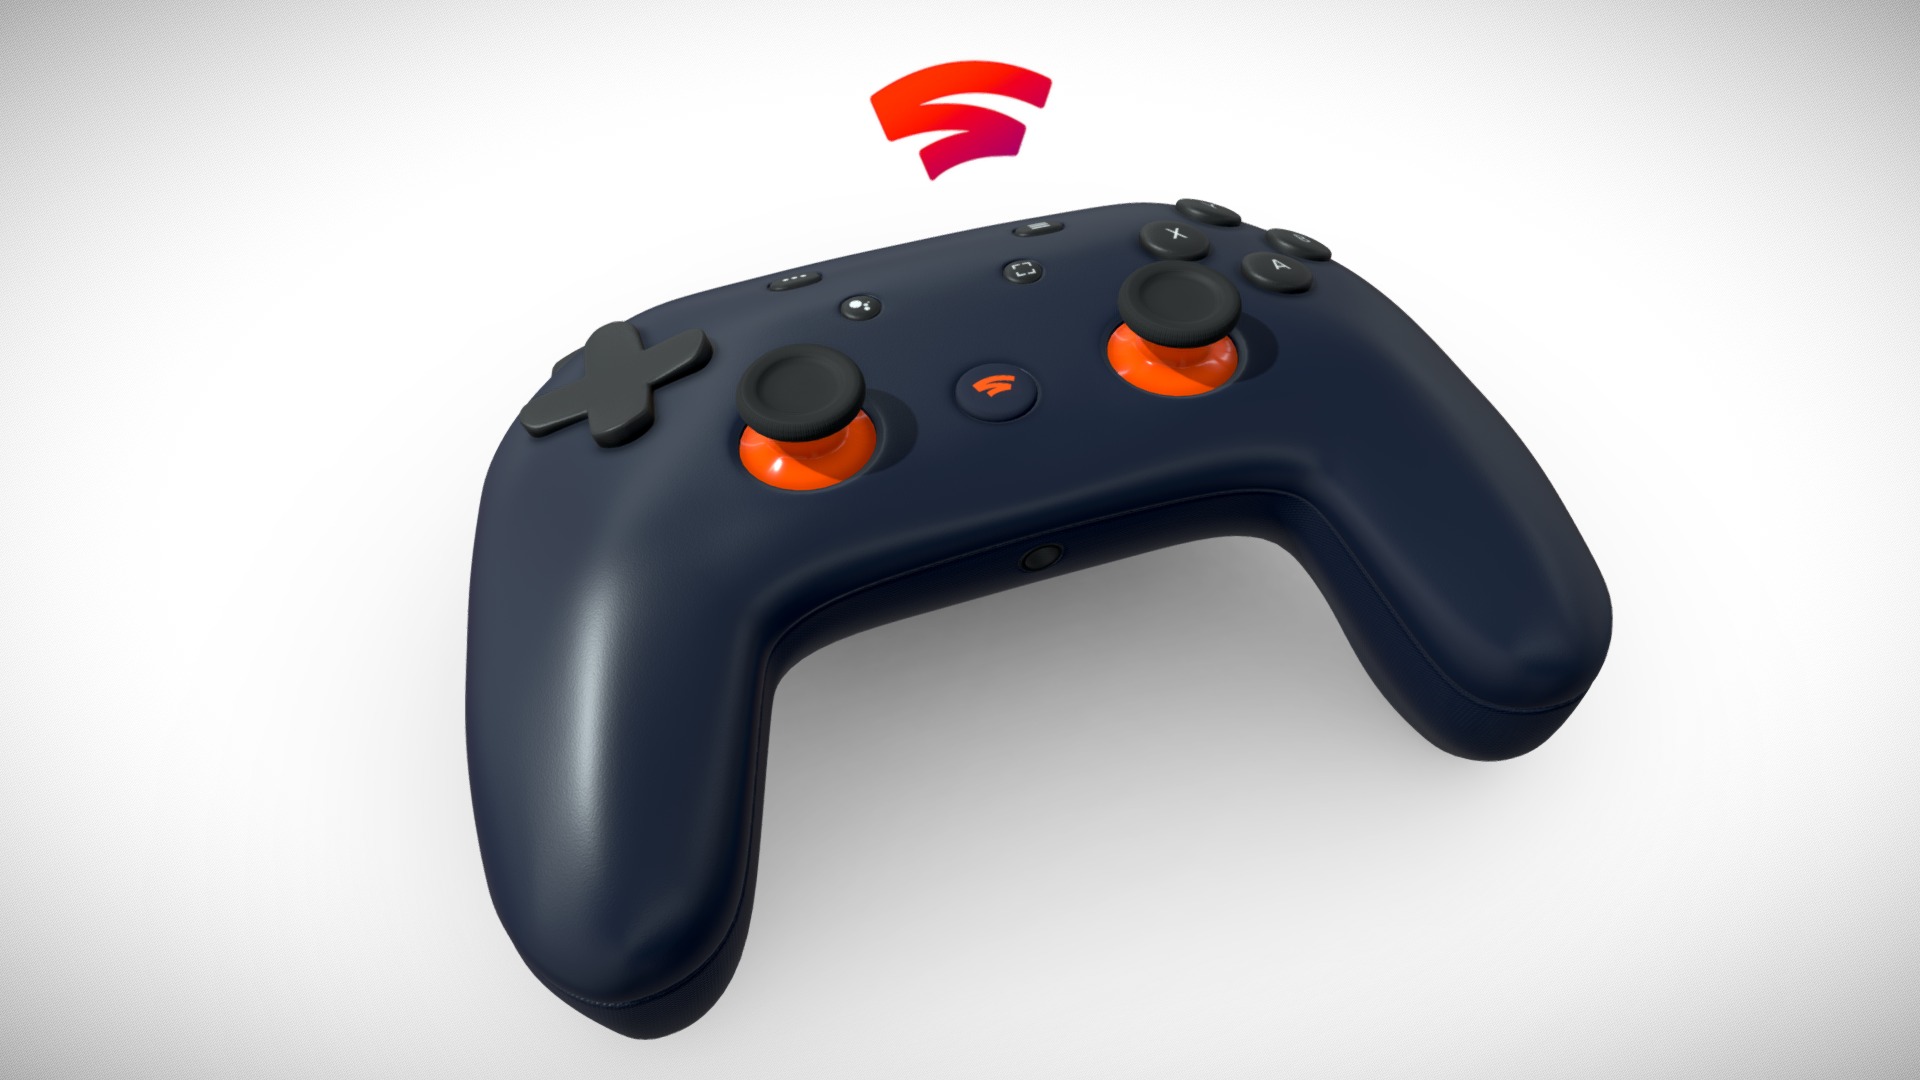 3D model Google Stadia Controller – "Founders Edition" - This is a 3D model of the Google Stadia Controller - "Founders Edition". The 3D model is about a black video game controller.